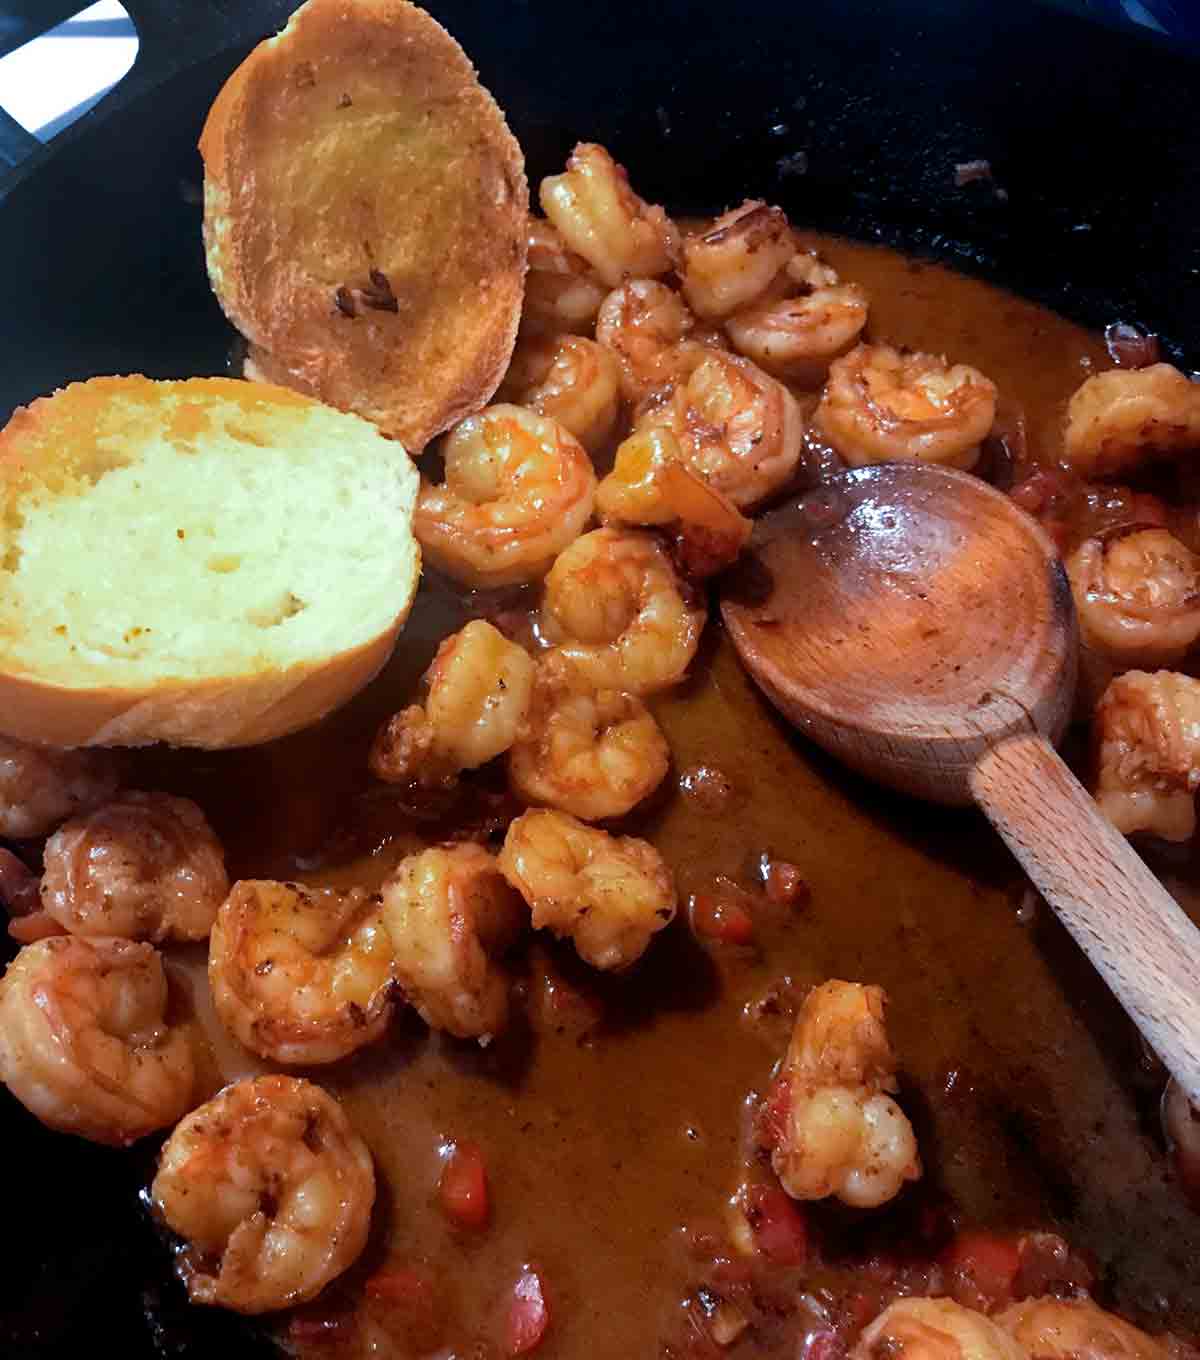 A cast-iron skillet filled with shrimp in a dark red sauce, with a wooden spoon and 2 pieces of toasted bread.